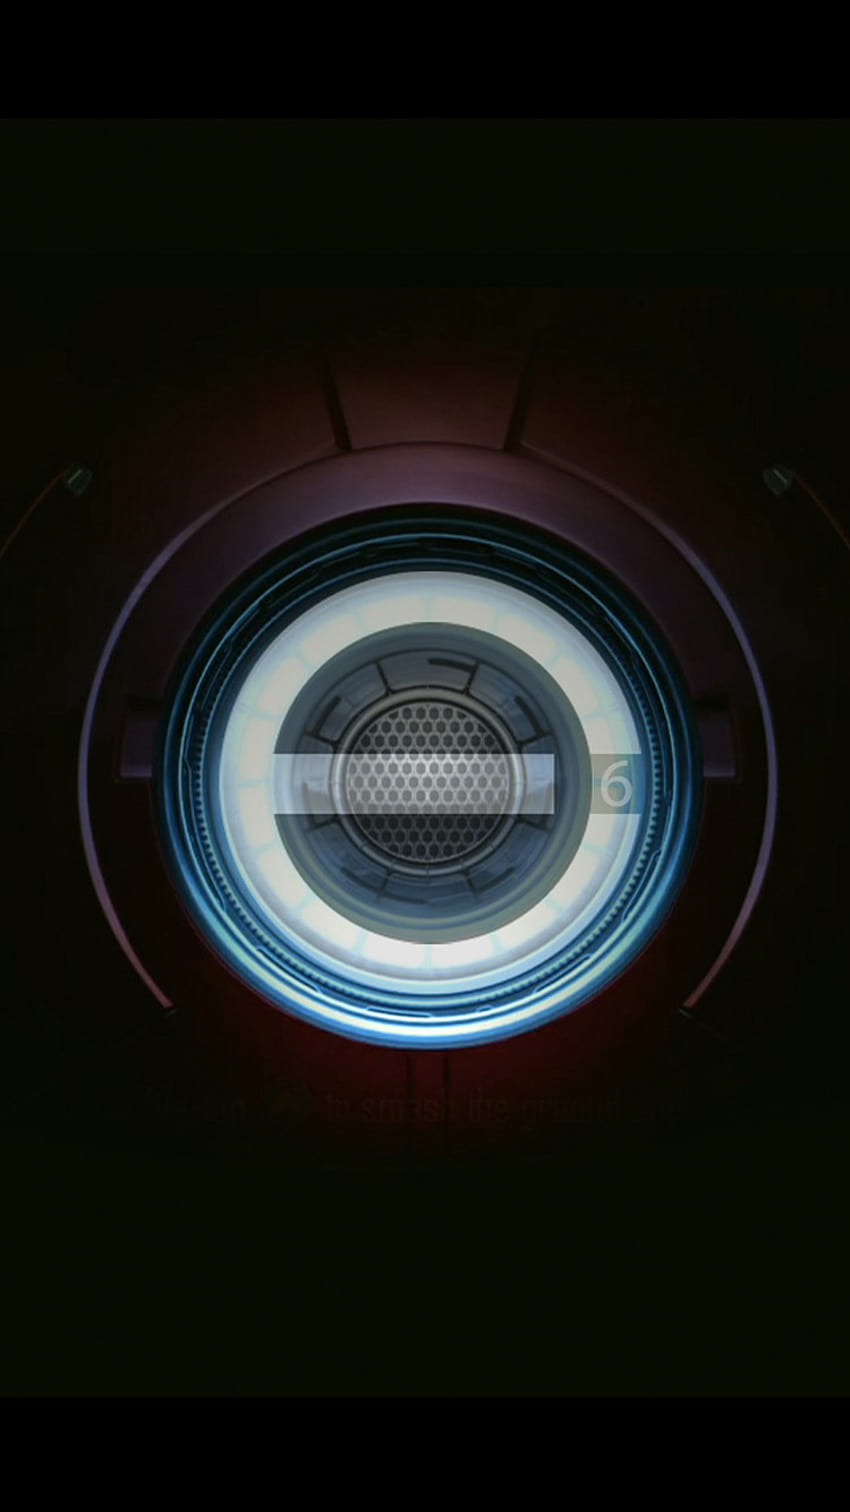 Iron Man Chest Pacemaker Plate iPhone 6 iPhone 6 [750x1334] for your , Mobile & Tablet, iron heart iphone HD phone wallpaper